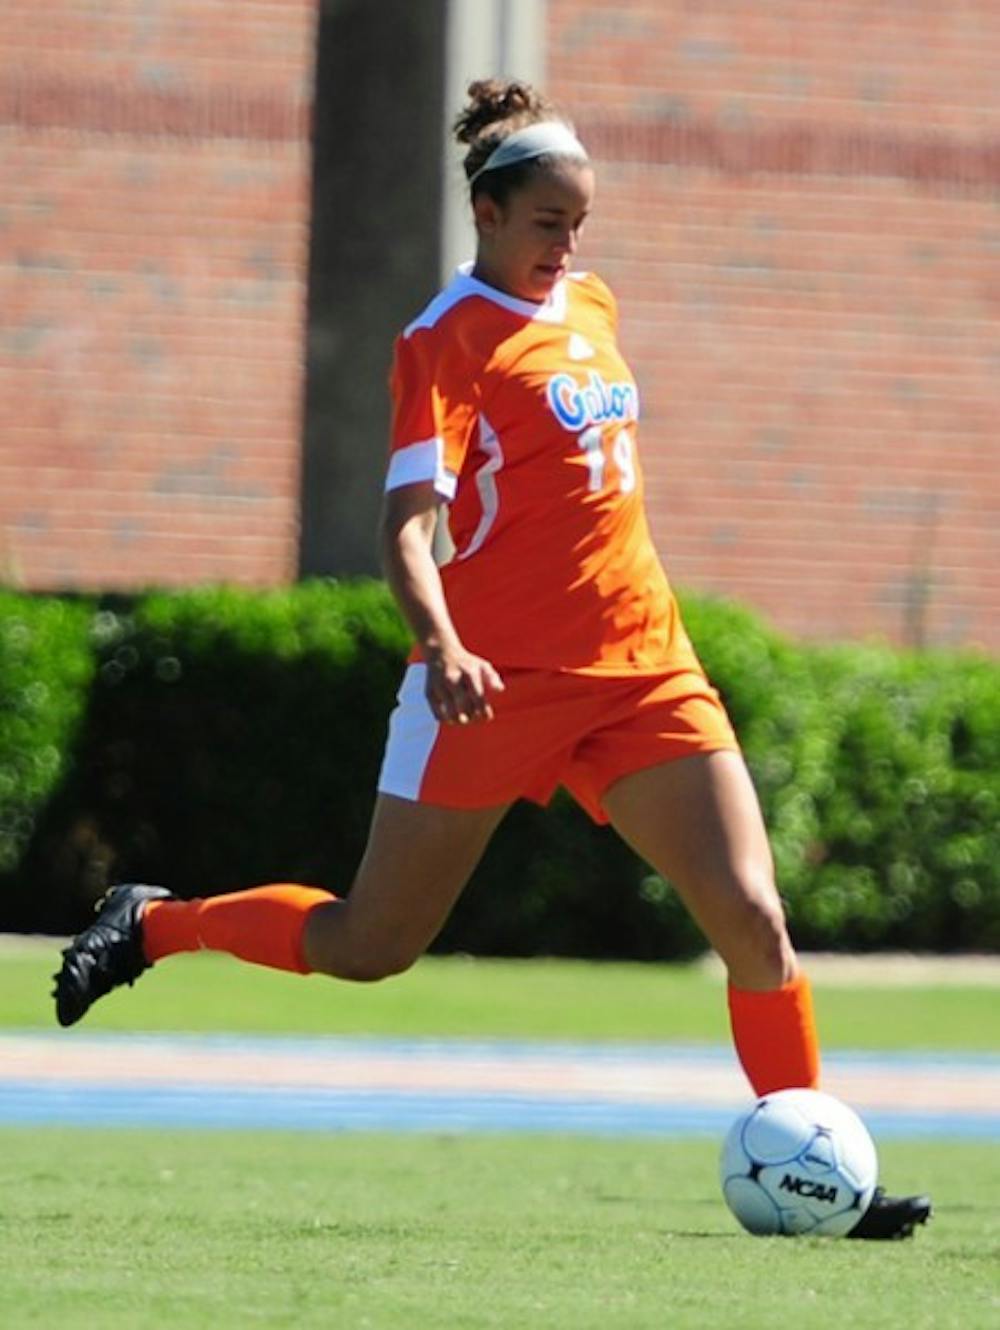 <p>Sophomore midfielder Havana Solaun scored the first goal of the game against Ole Miss early in the first half. Solaun leads the Gators with four goals on the season.</p>